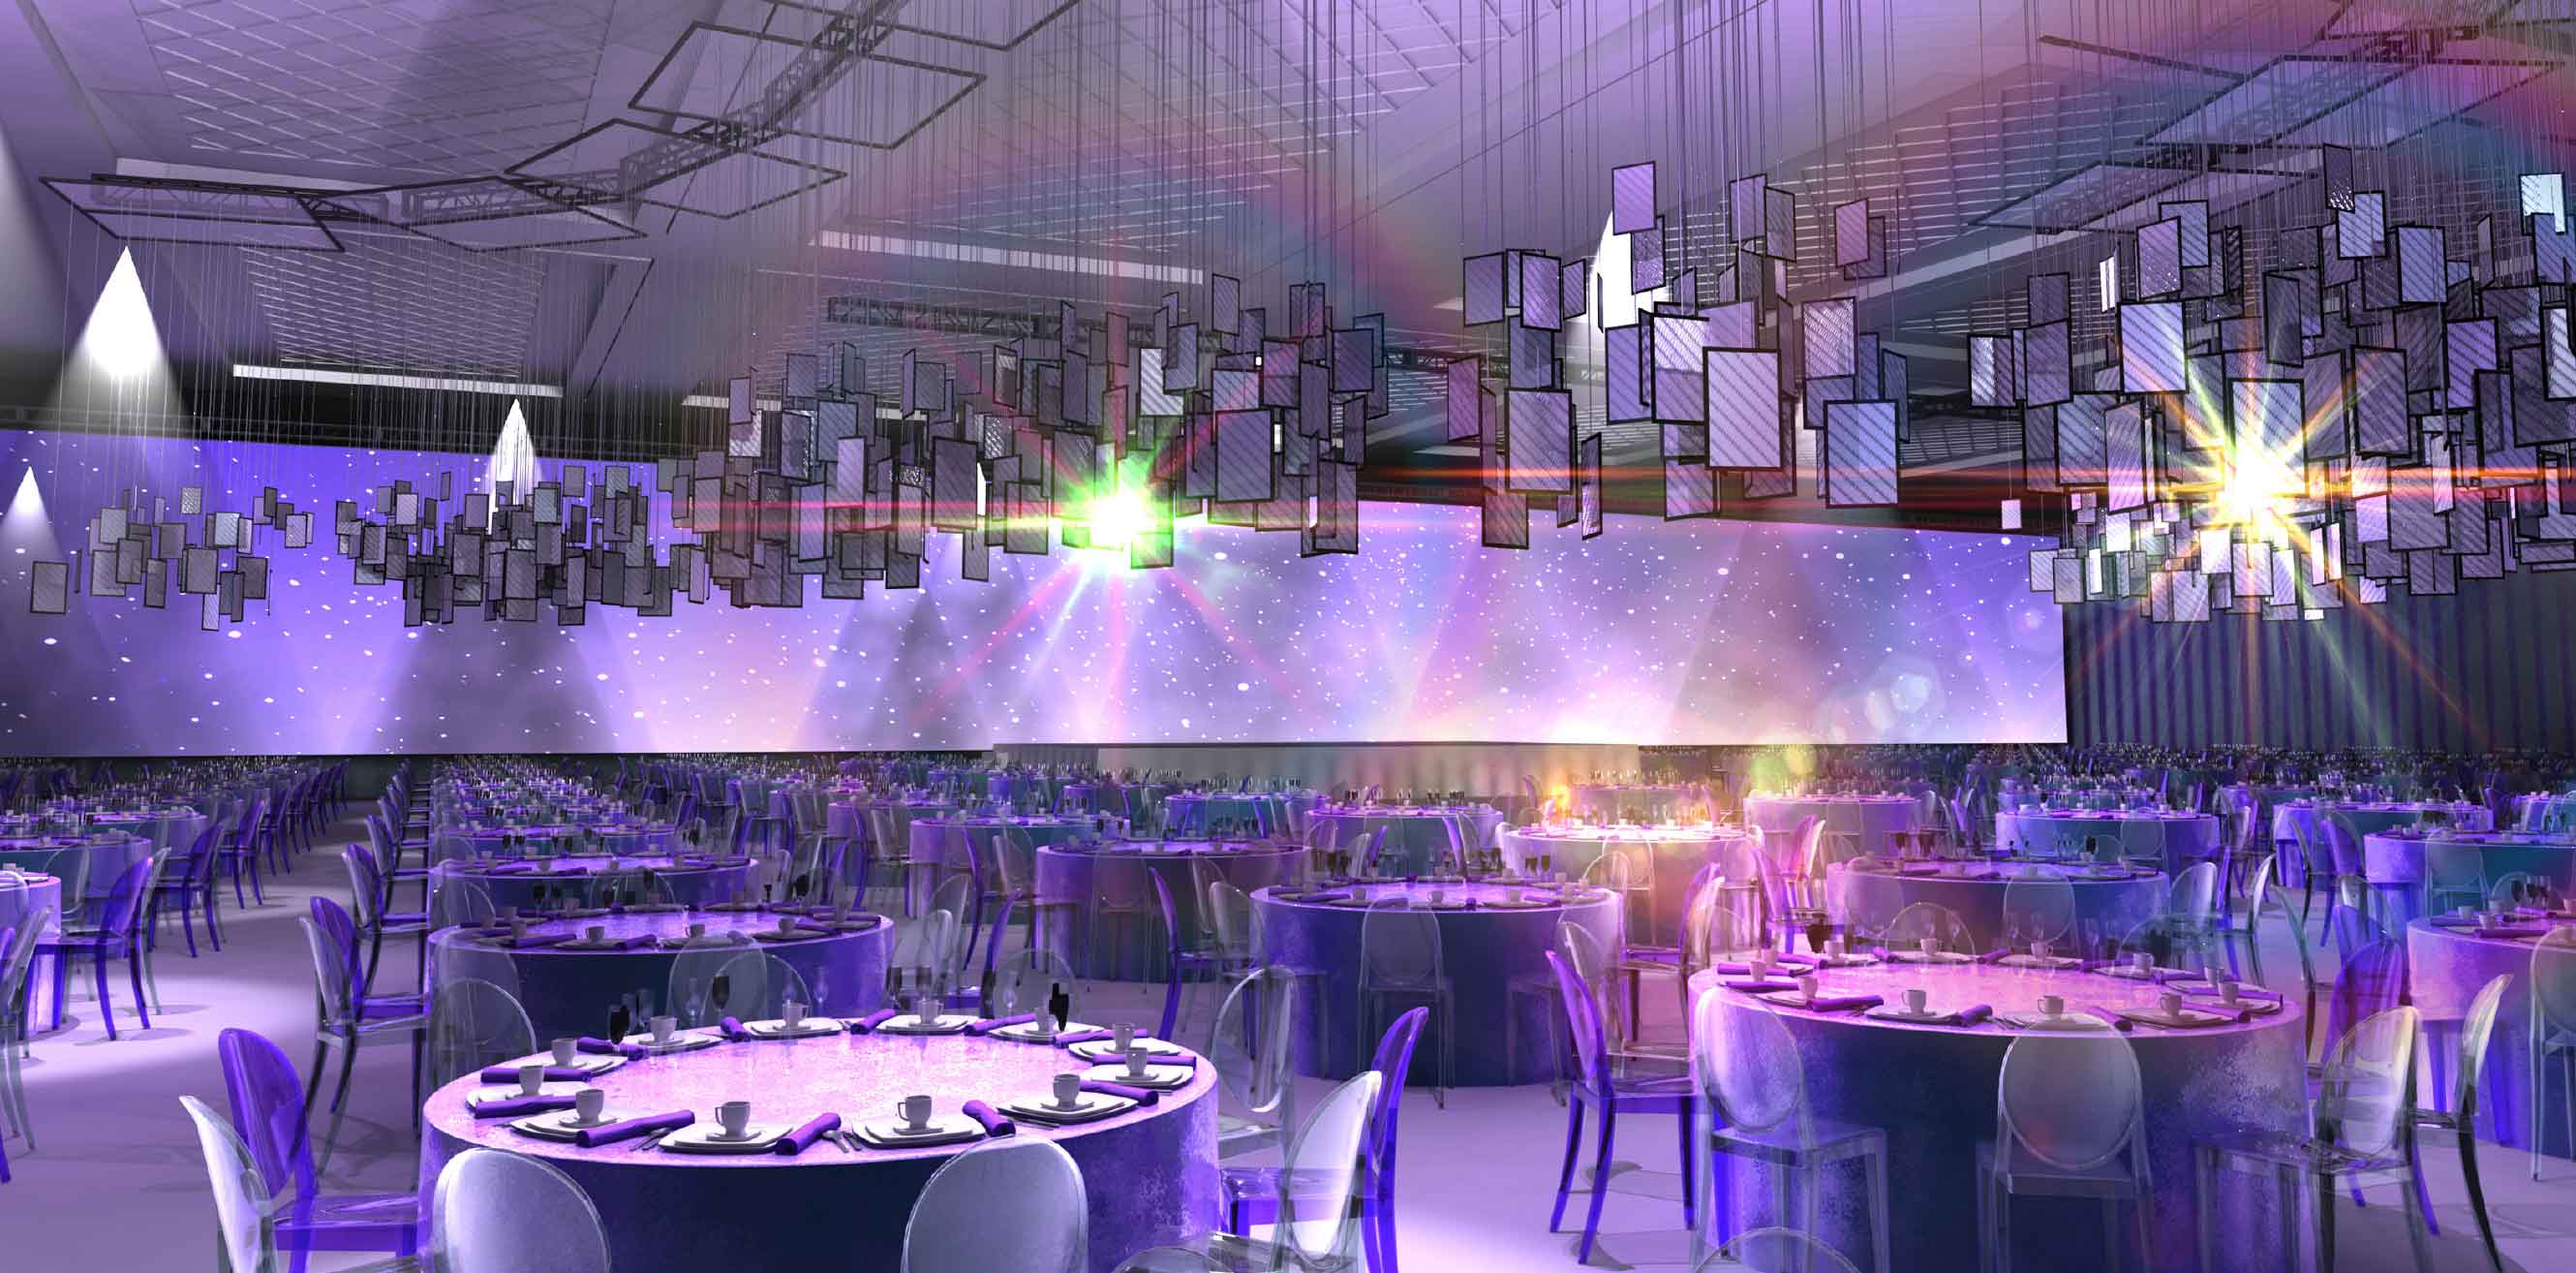 3D rendering of reception tables and lighting structures